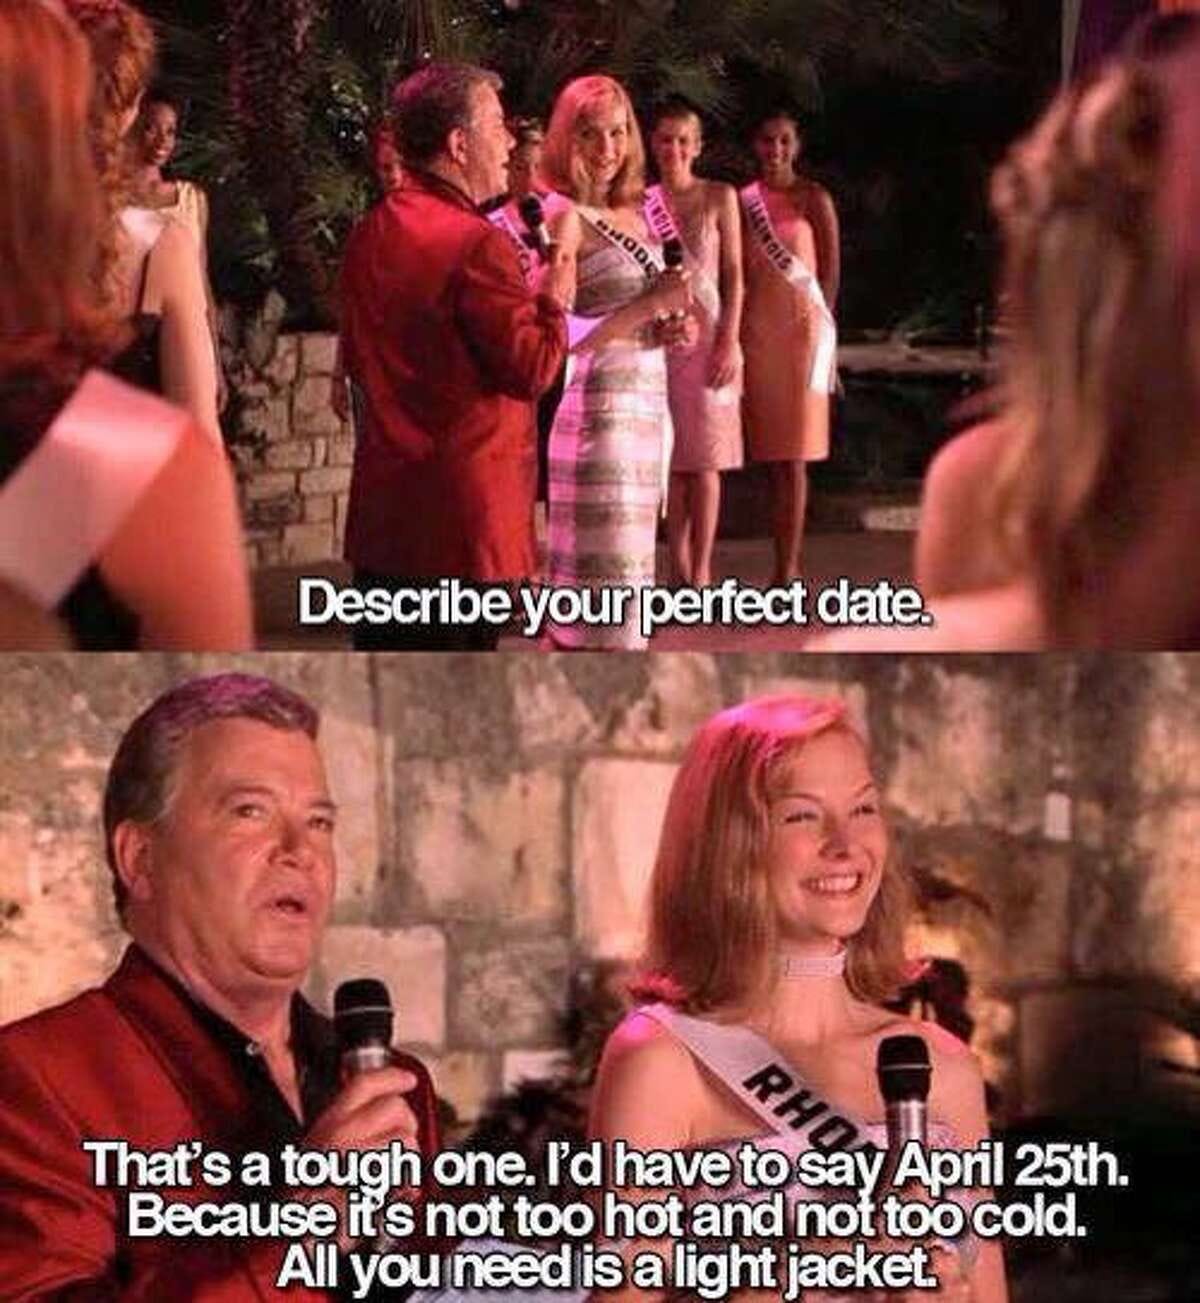 Two screenshots from the movie Miss Congeniality. In the first, the pageant host asks a contestant to describe her perfect date. In the second she replies, That's a tough one. I'd have to say April 25th. It's not too hot, not too cold. All you need is a light jacket."